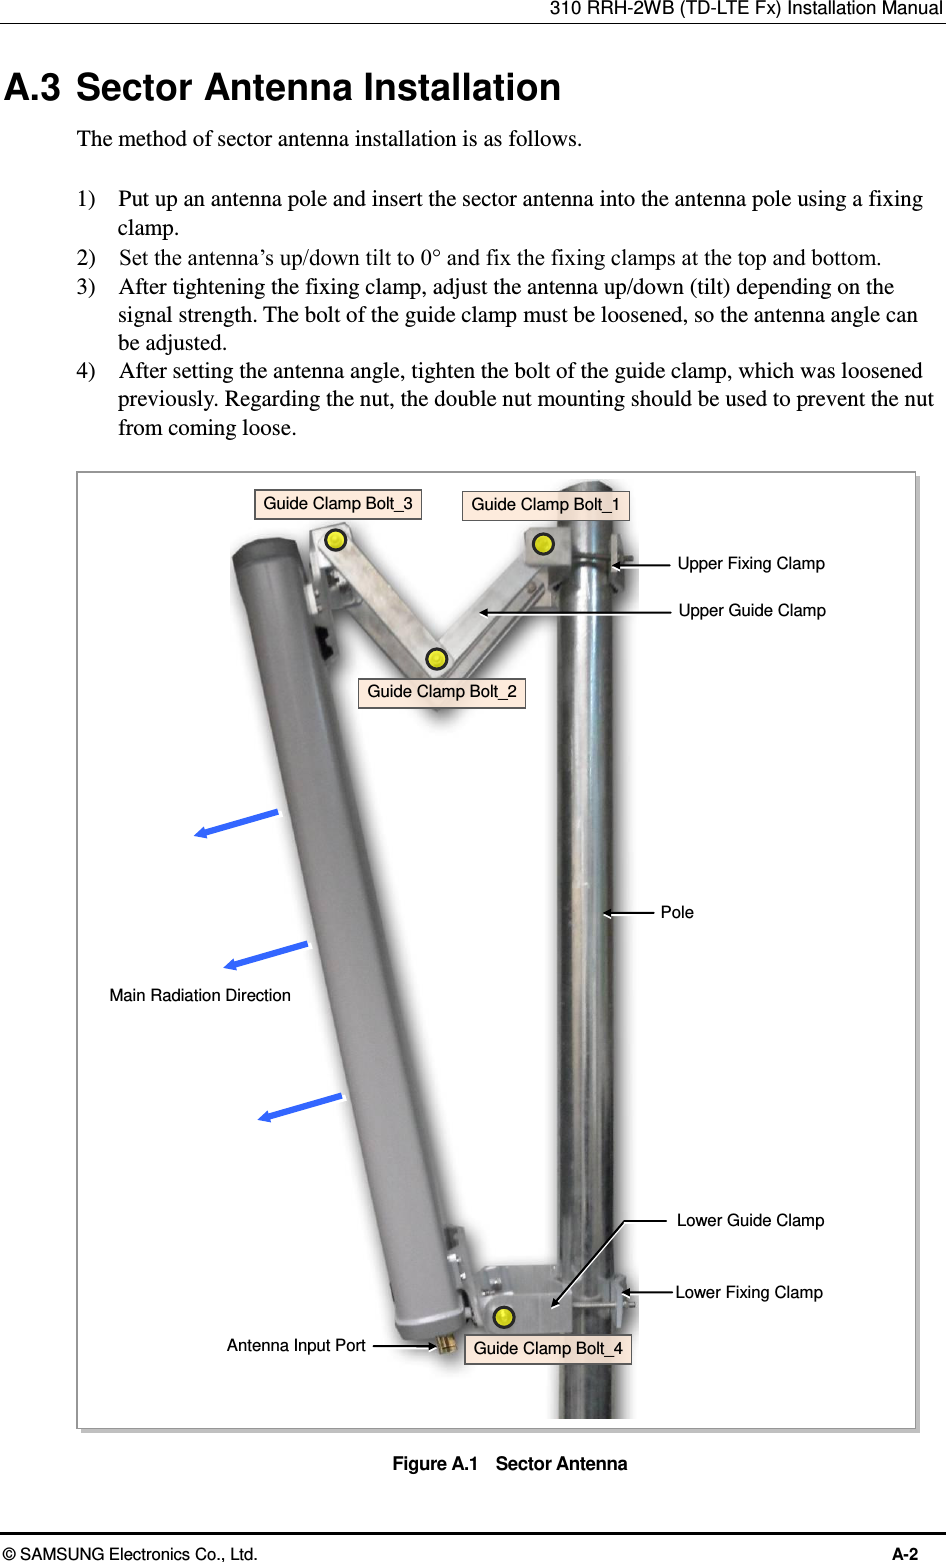 310 RRH-2WB (TD-LTE Fx) Installation Manual  © SAMSUNG Electronics Co., Ltd.  A-2 A.3  Sector Antenna Installation The method of sector antenna installation is as follows.  1)    Put up an antenna pole and insert the sector antenna into the antenna pole using a fixing clamp. 2)    Set the antenna’s up/down tilt to 0° and fix the fixing clamps at the top and bottom. 3)    After tightening the fixing clamp, adjust the antenna up/down (tilt) depending on the signal strength. The bolt of the guide clamp must be loosened, so the antenna angle can be adjusted. 4)    After setting the antenna angle, tighten the bolt of the guide clamp, which was loosened previously. Regarding the nut, the double nut mounting should be used to prevent the nut from coming loose.  Figure A.1    Sector Antenna Antenna Input Port Pole Main Radiation Direction Upper Fixing Clamp Lower Fixing Clamp Upper Guide Clamp Lower Guide Clamp Guide Clamp Bolt_2 Guide Clamp Bolt_1 Guide Clamp Bolt_3 Guide Clamp Bolt_4 